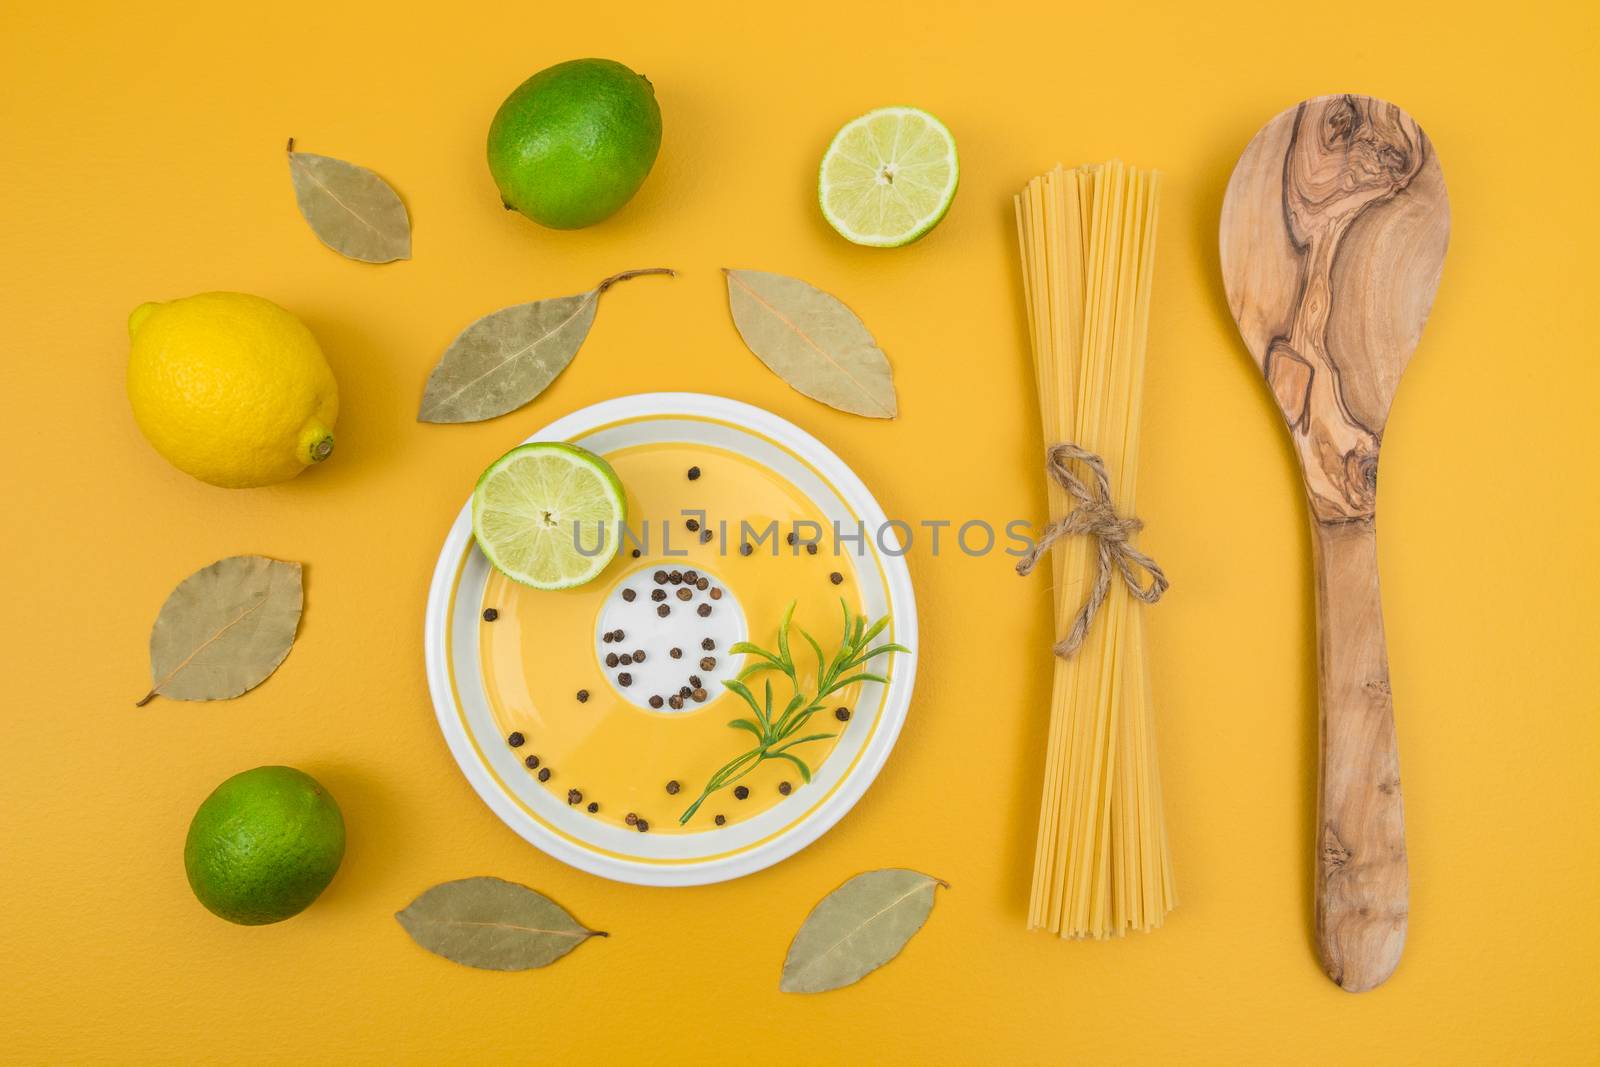 Cooking ingredients on bright yellow background. Limes, lemons, laurel leaves, pasta and spices.